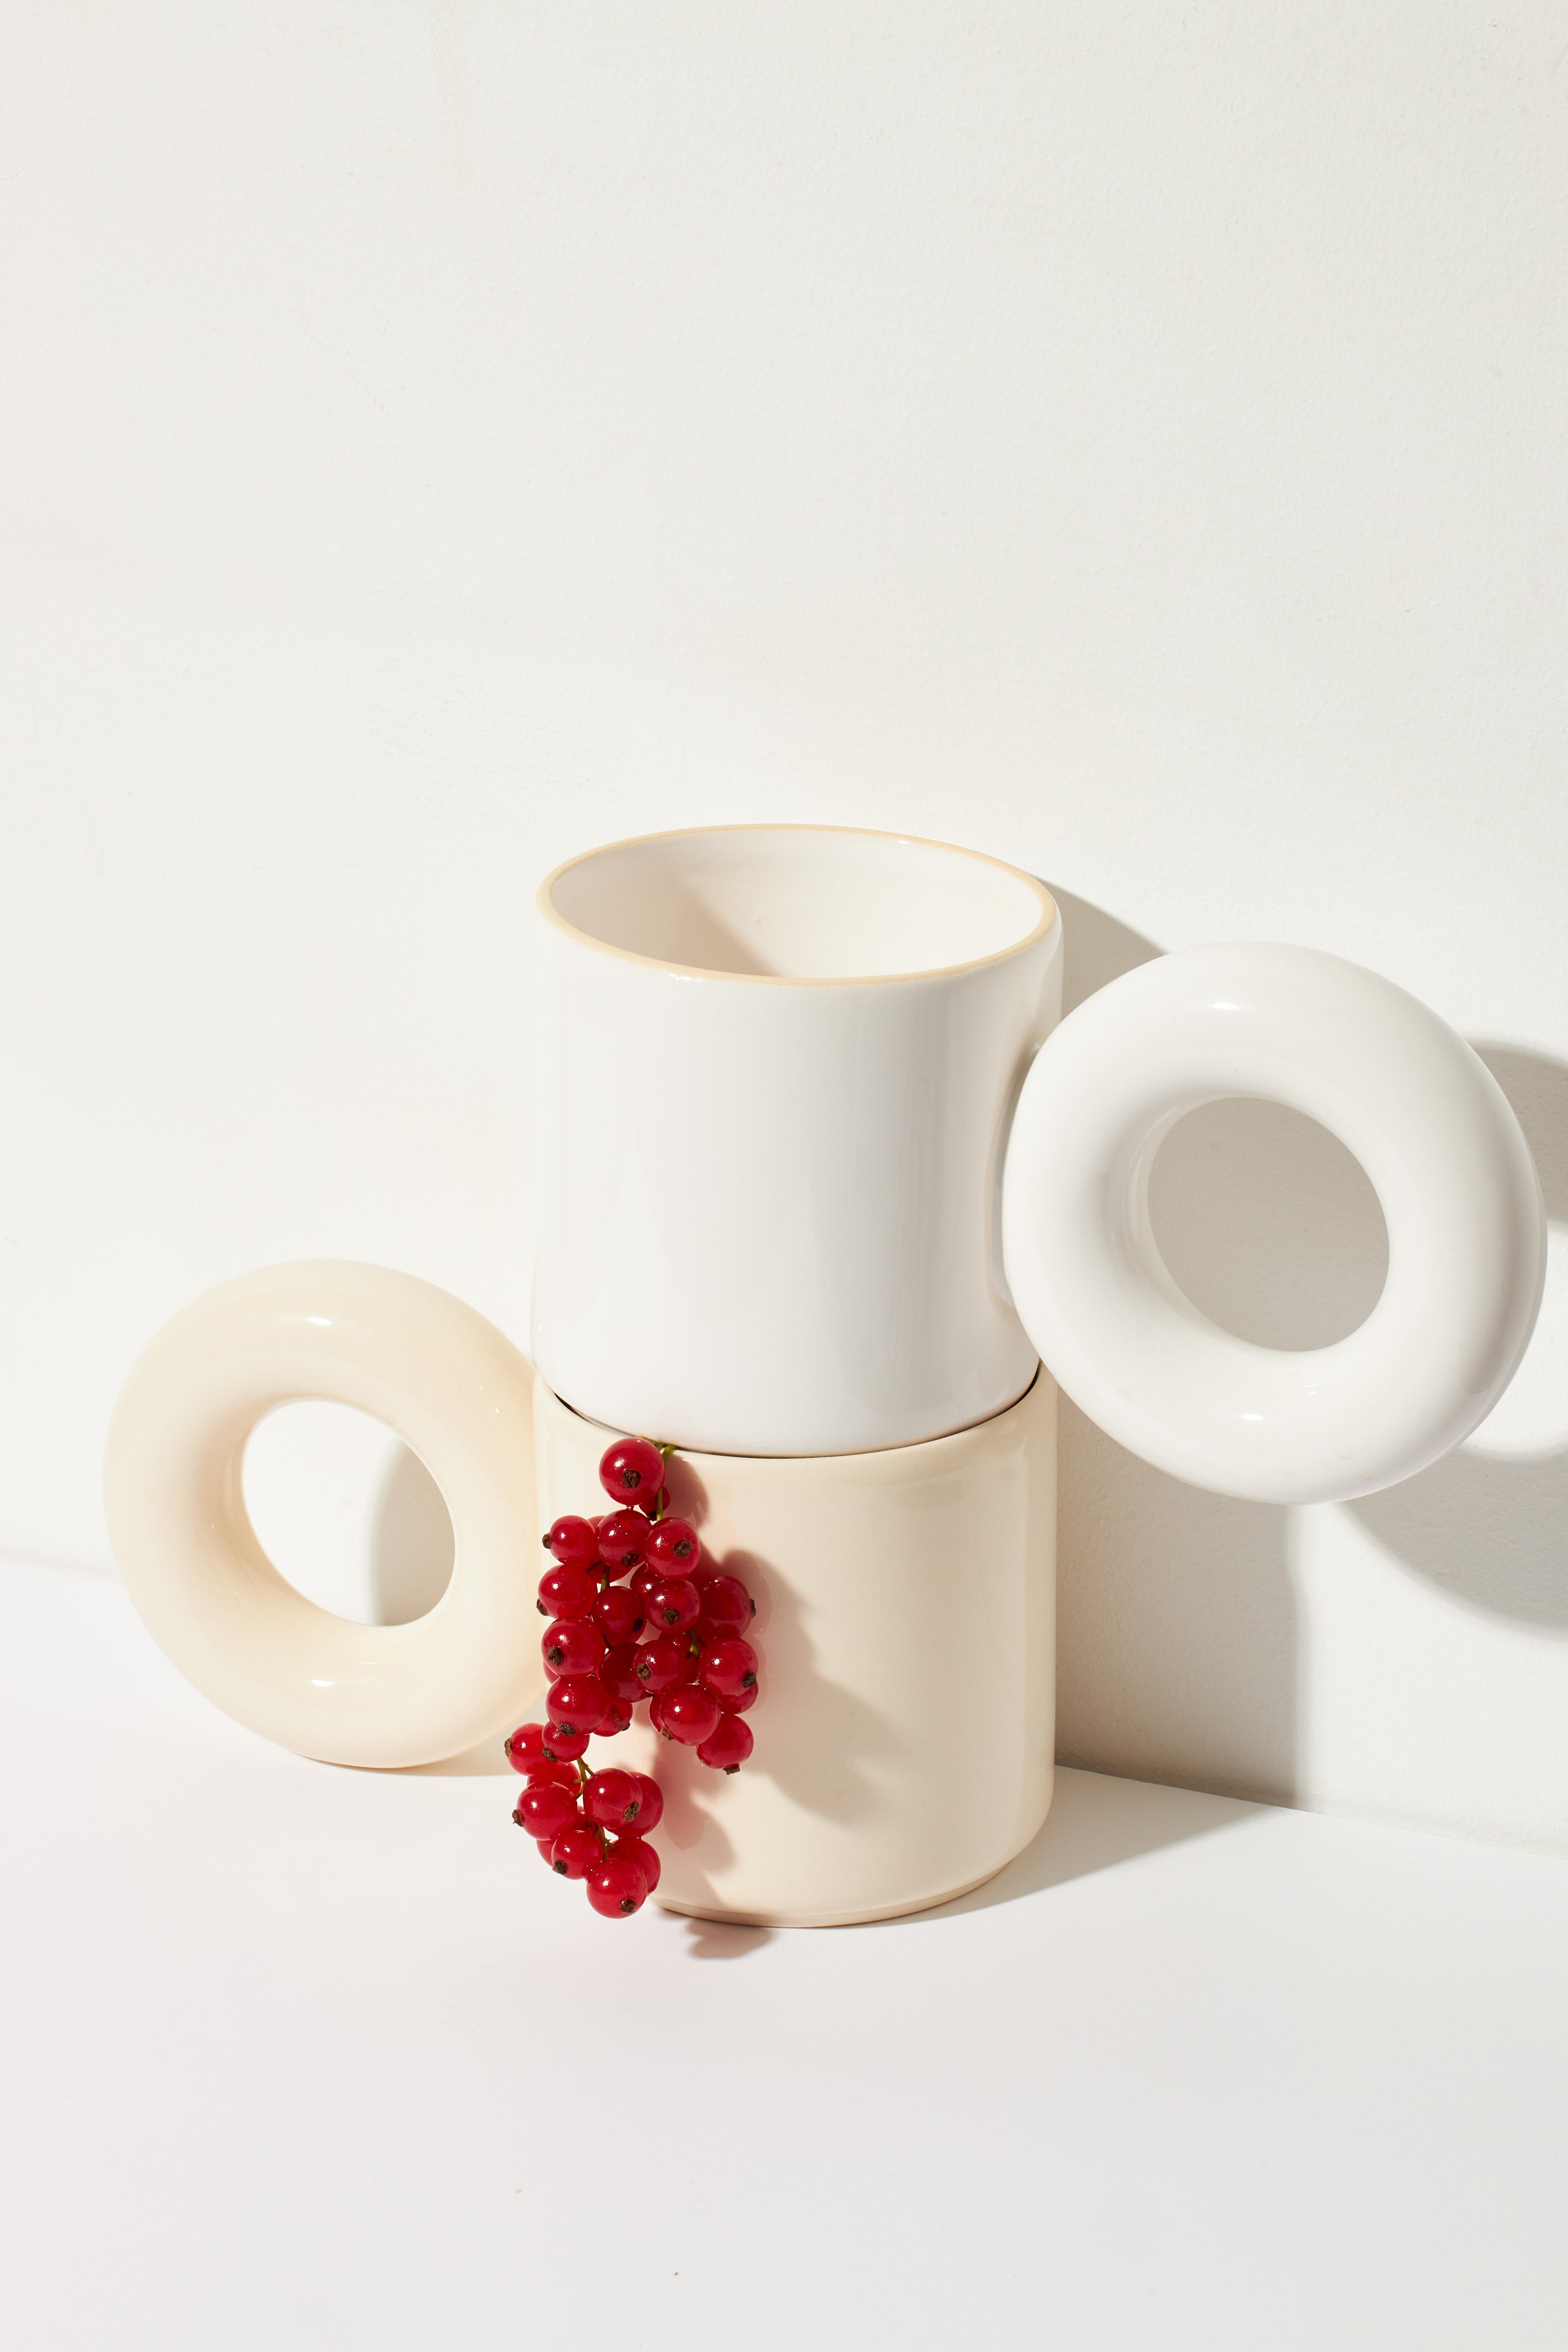 Funny, capacious, and handy – that's what UCHO is all about, the first mug in the OKO Family that begins a new chapter in the brand's history. The mug has a sturdy handle shaped like a well-known pretzel, which fits perfectly in the hand! Charming